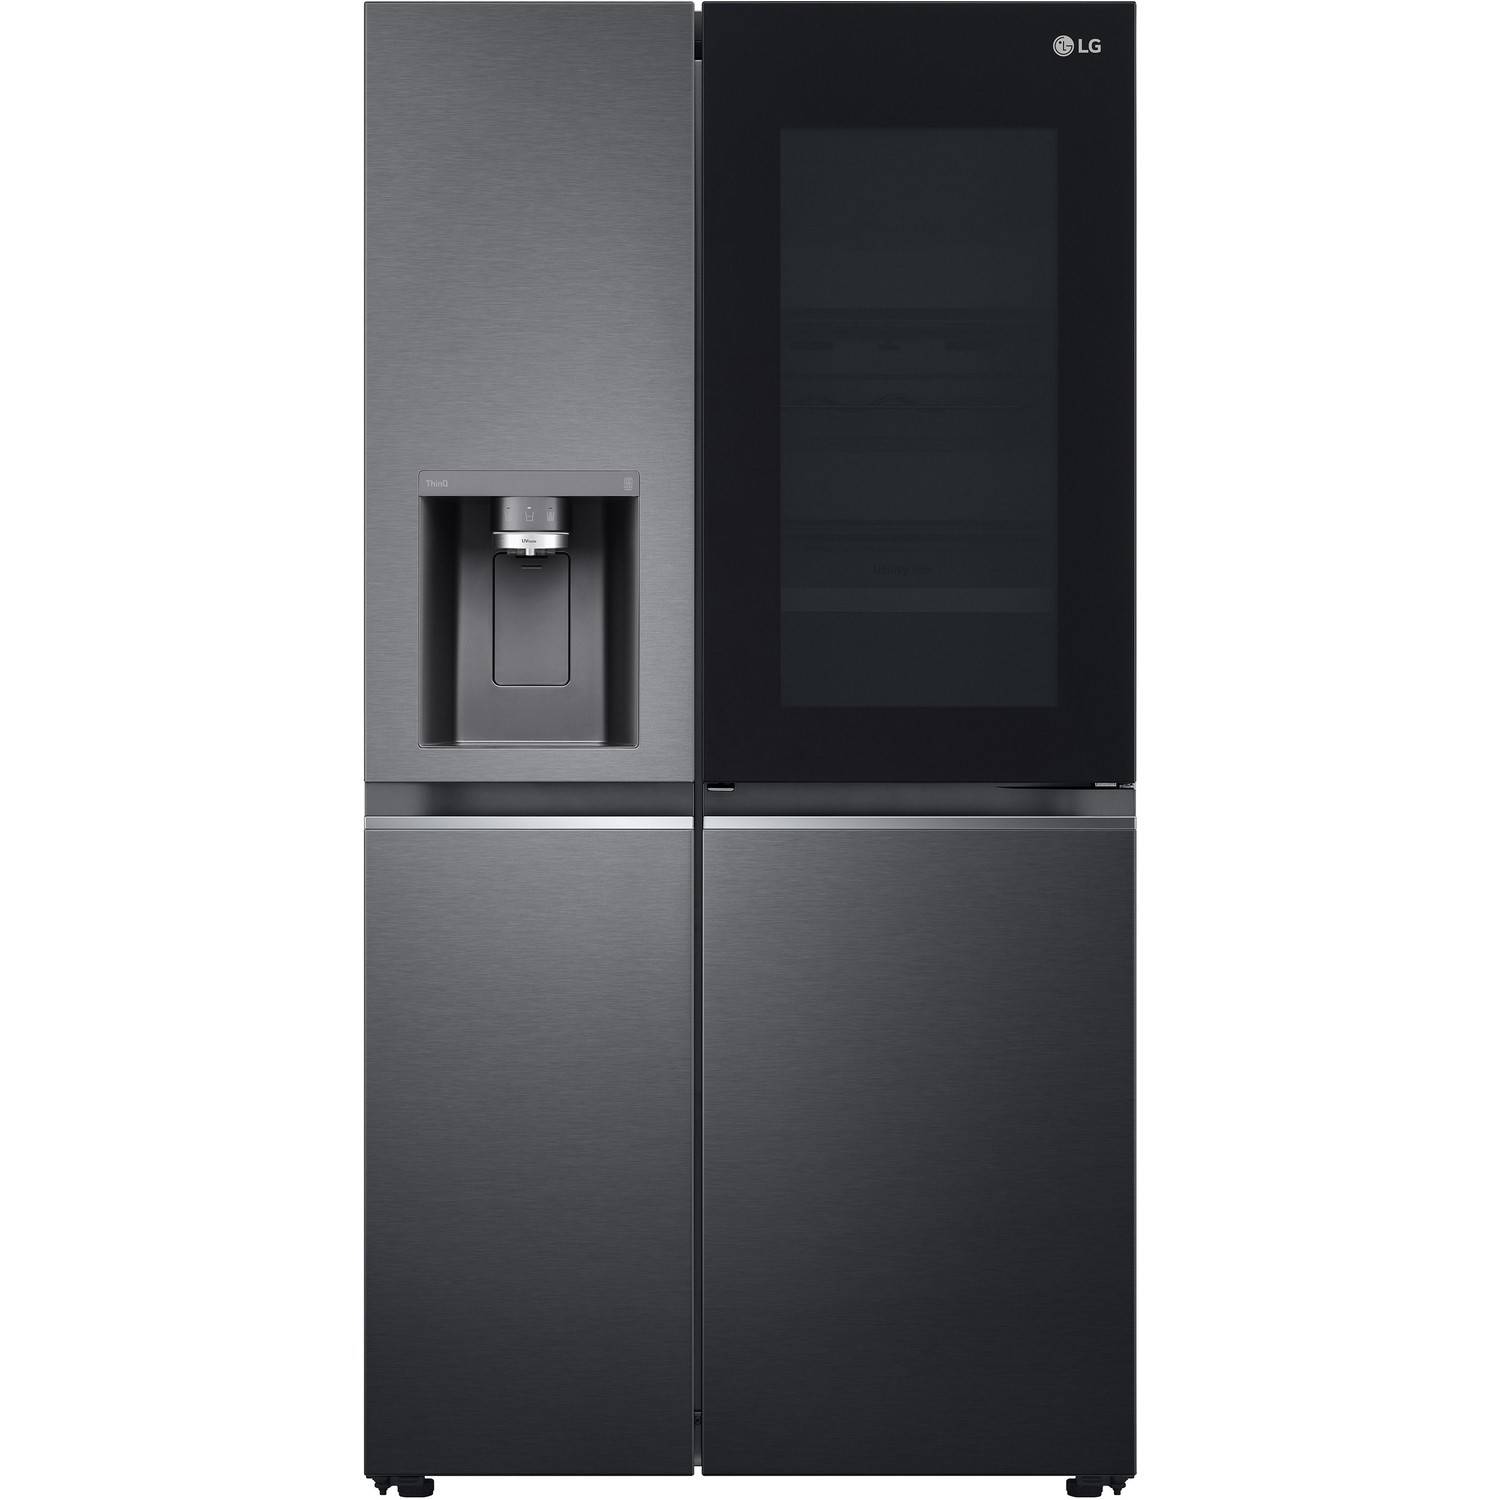 LG InstaView ThinQ American Fridge Freezer With Non-Plumbed Ice And Water Dispenser - Matte Black